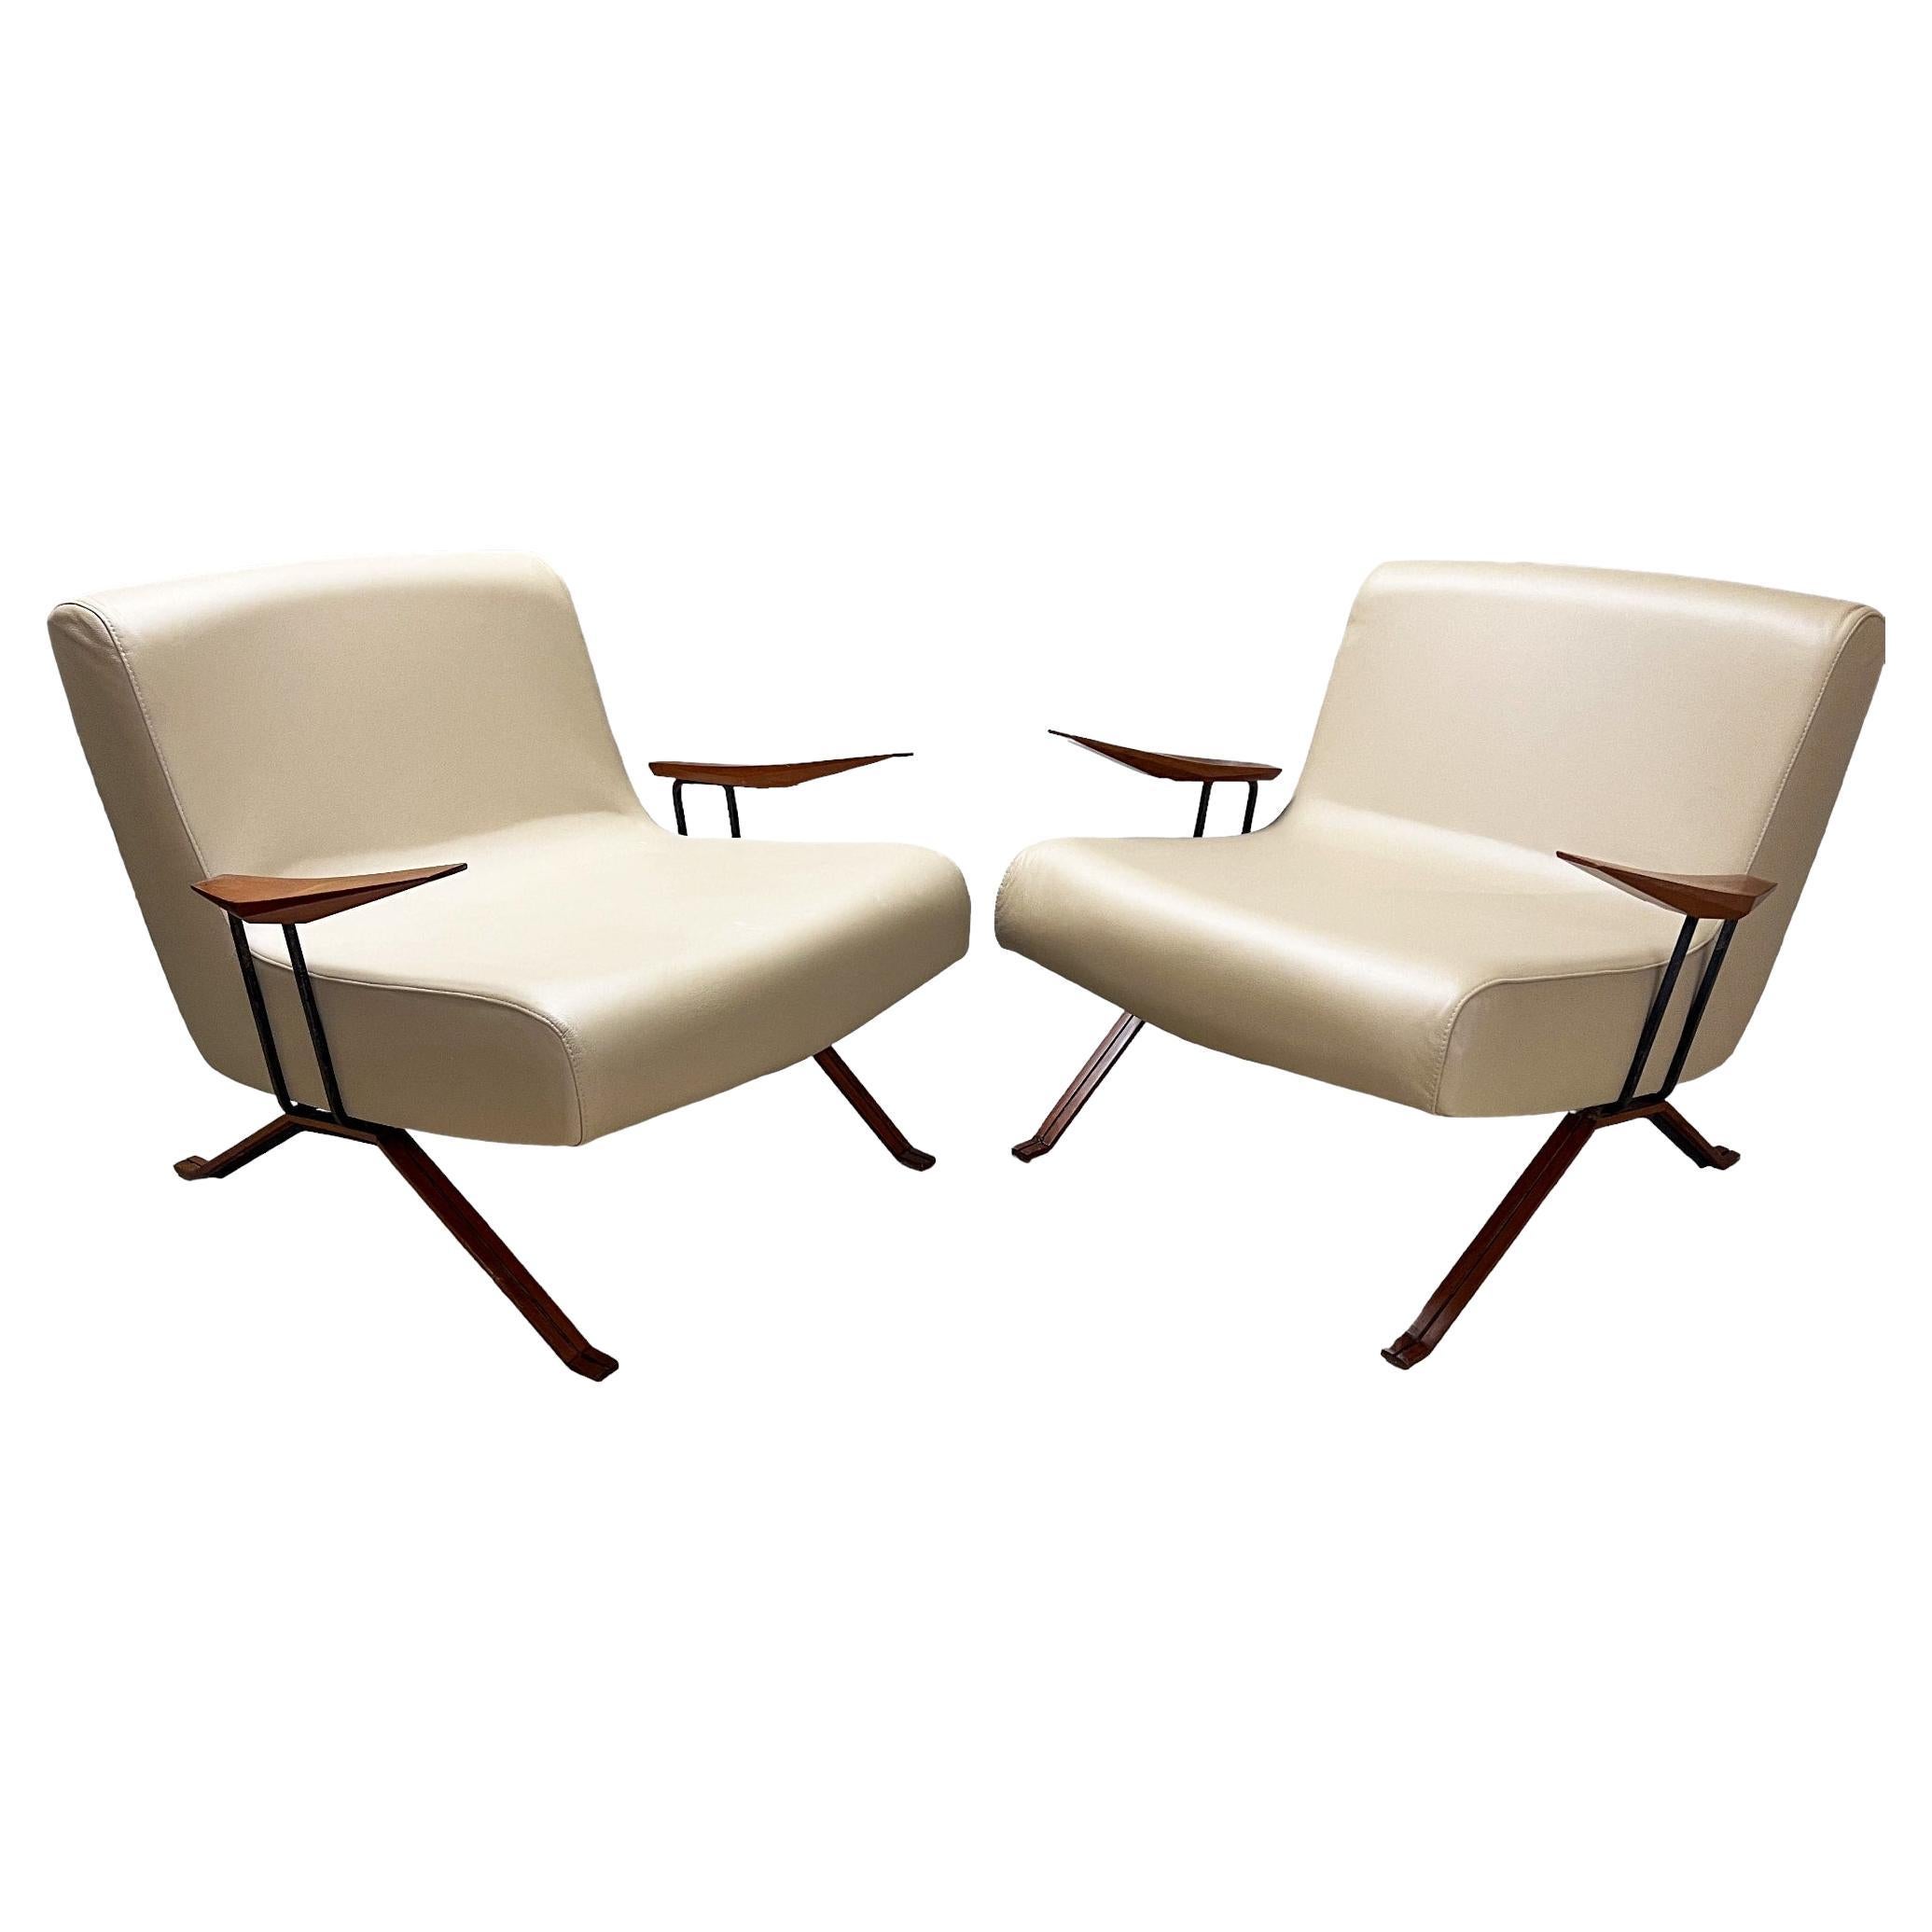 Brazilian Modern "MP-01" 2 Chair Set in Wood and Leather by Percival Lafer, 1963